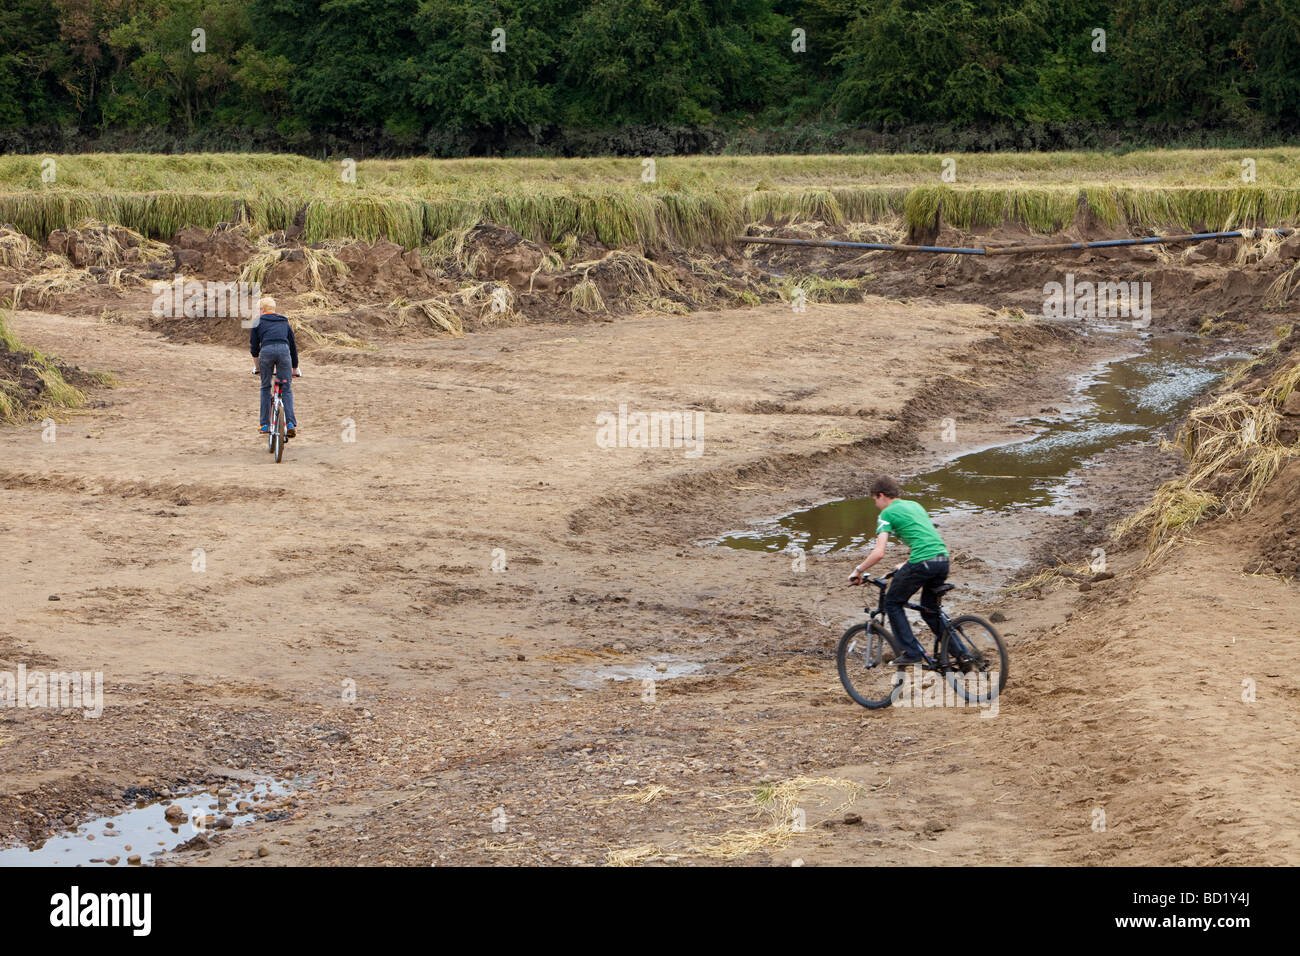 The Durham Canyon caused by flooding that washed away thousands of tons of soil, Durham, UK. Stock Photo